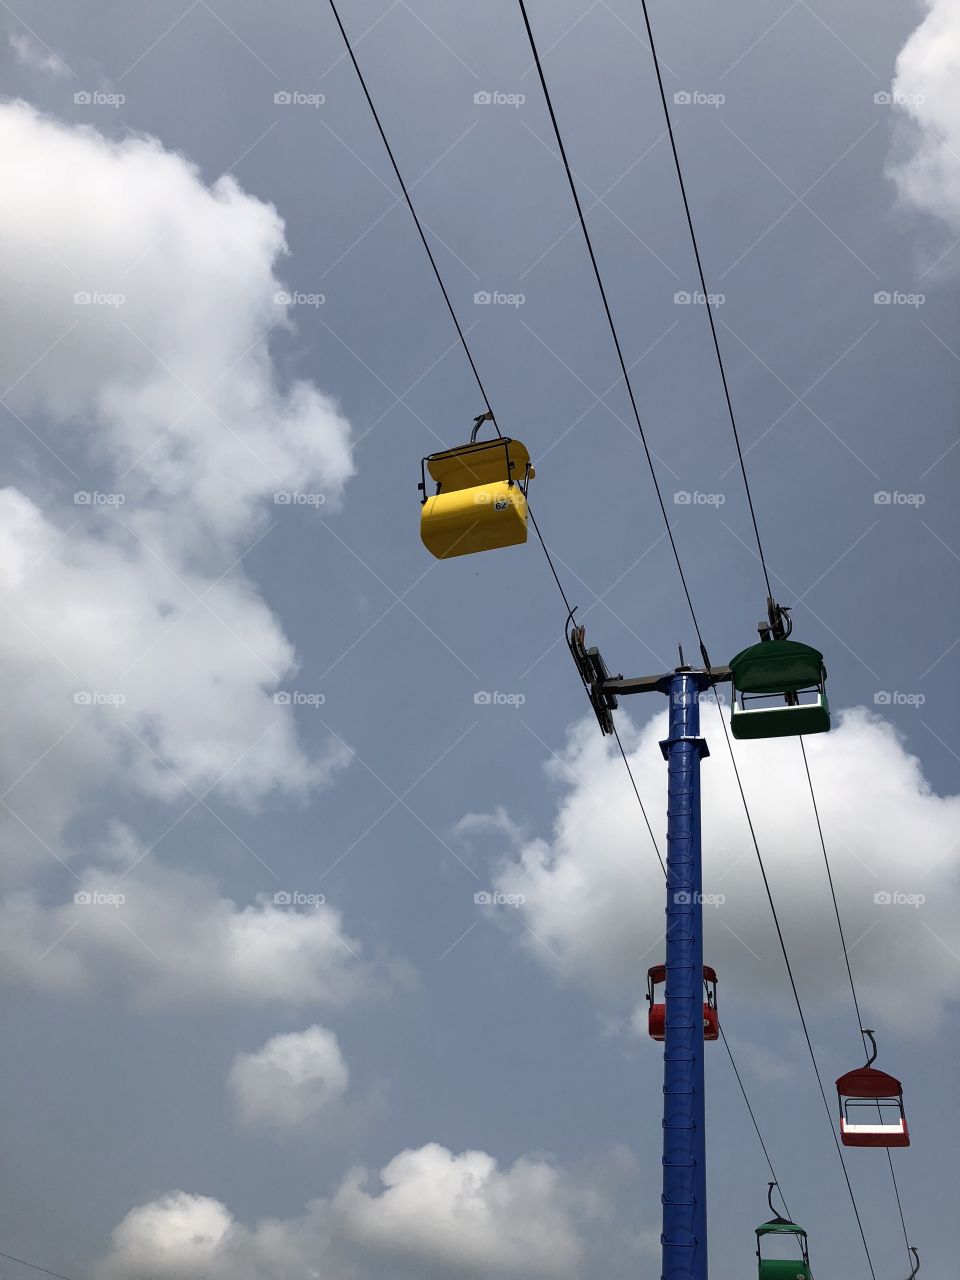 Rides in the sky